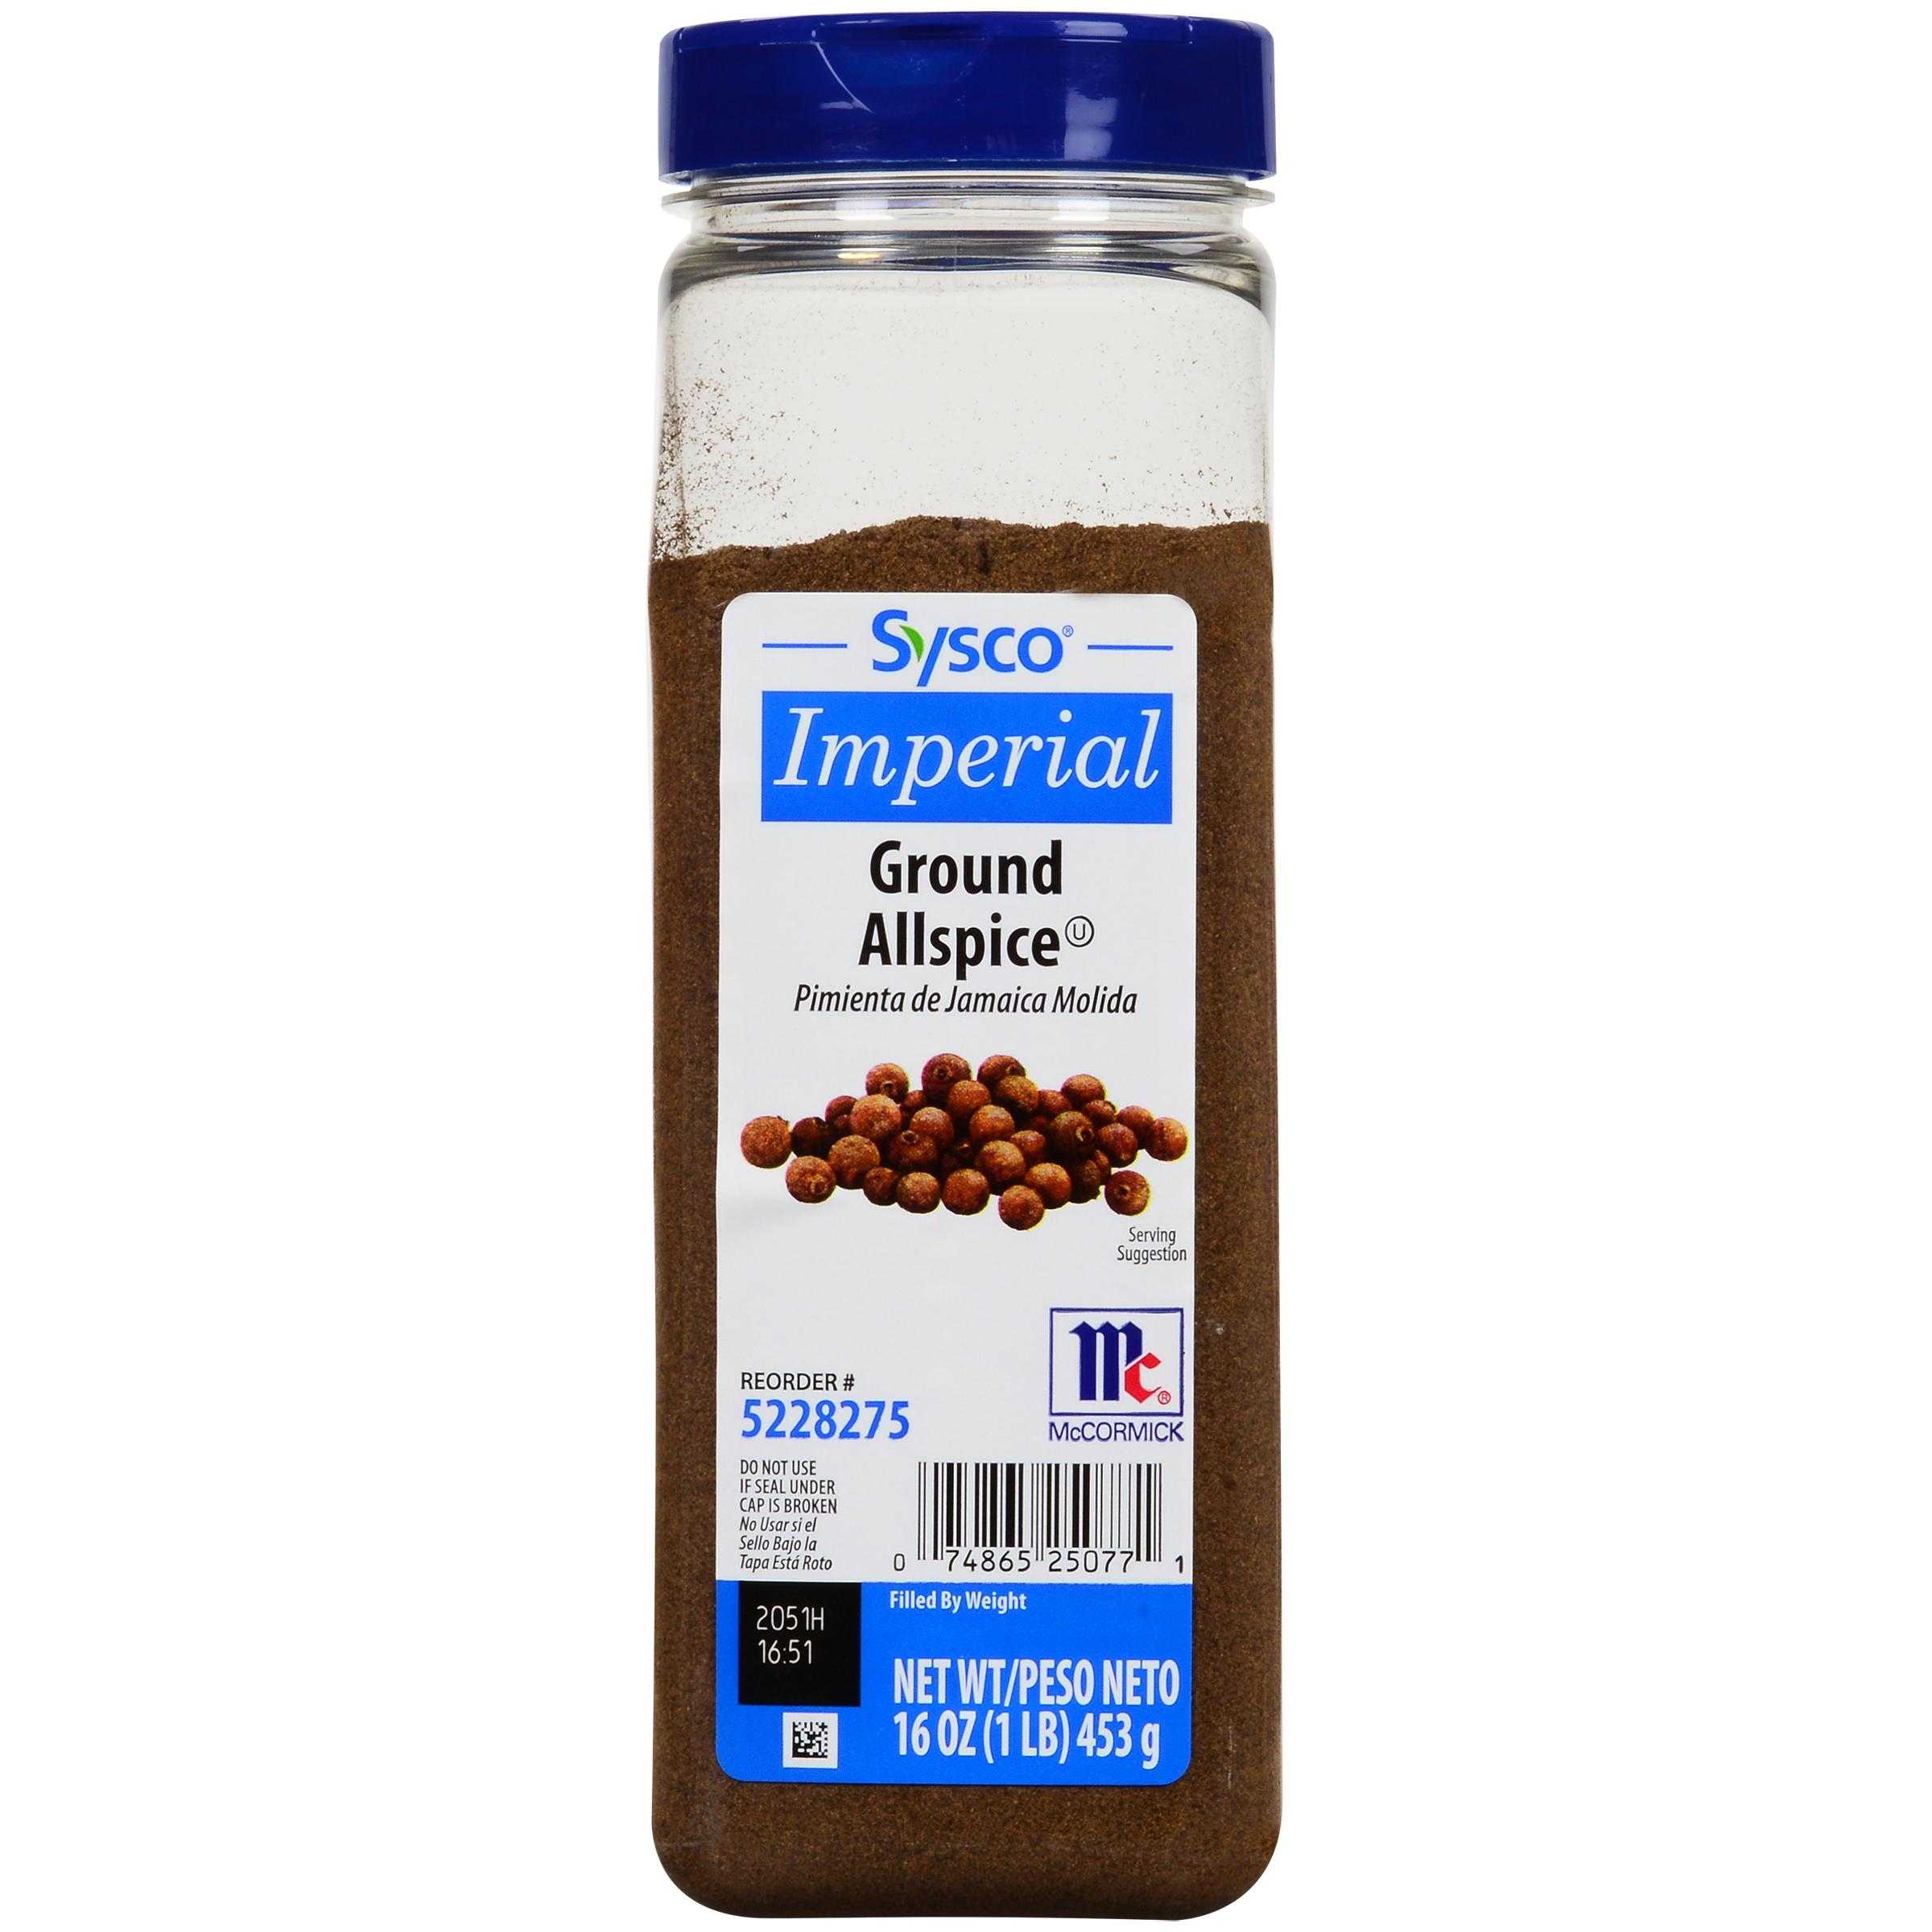 Introducing New Sysco® Imperial McCormick Spices